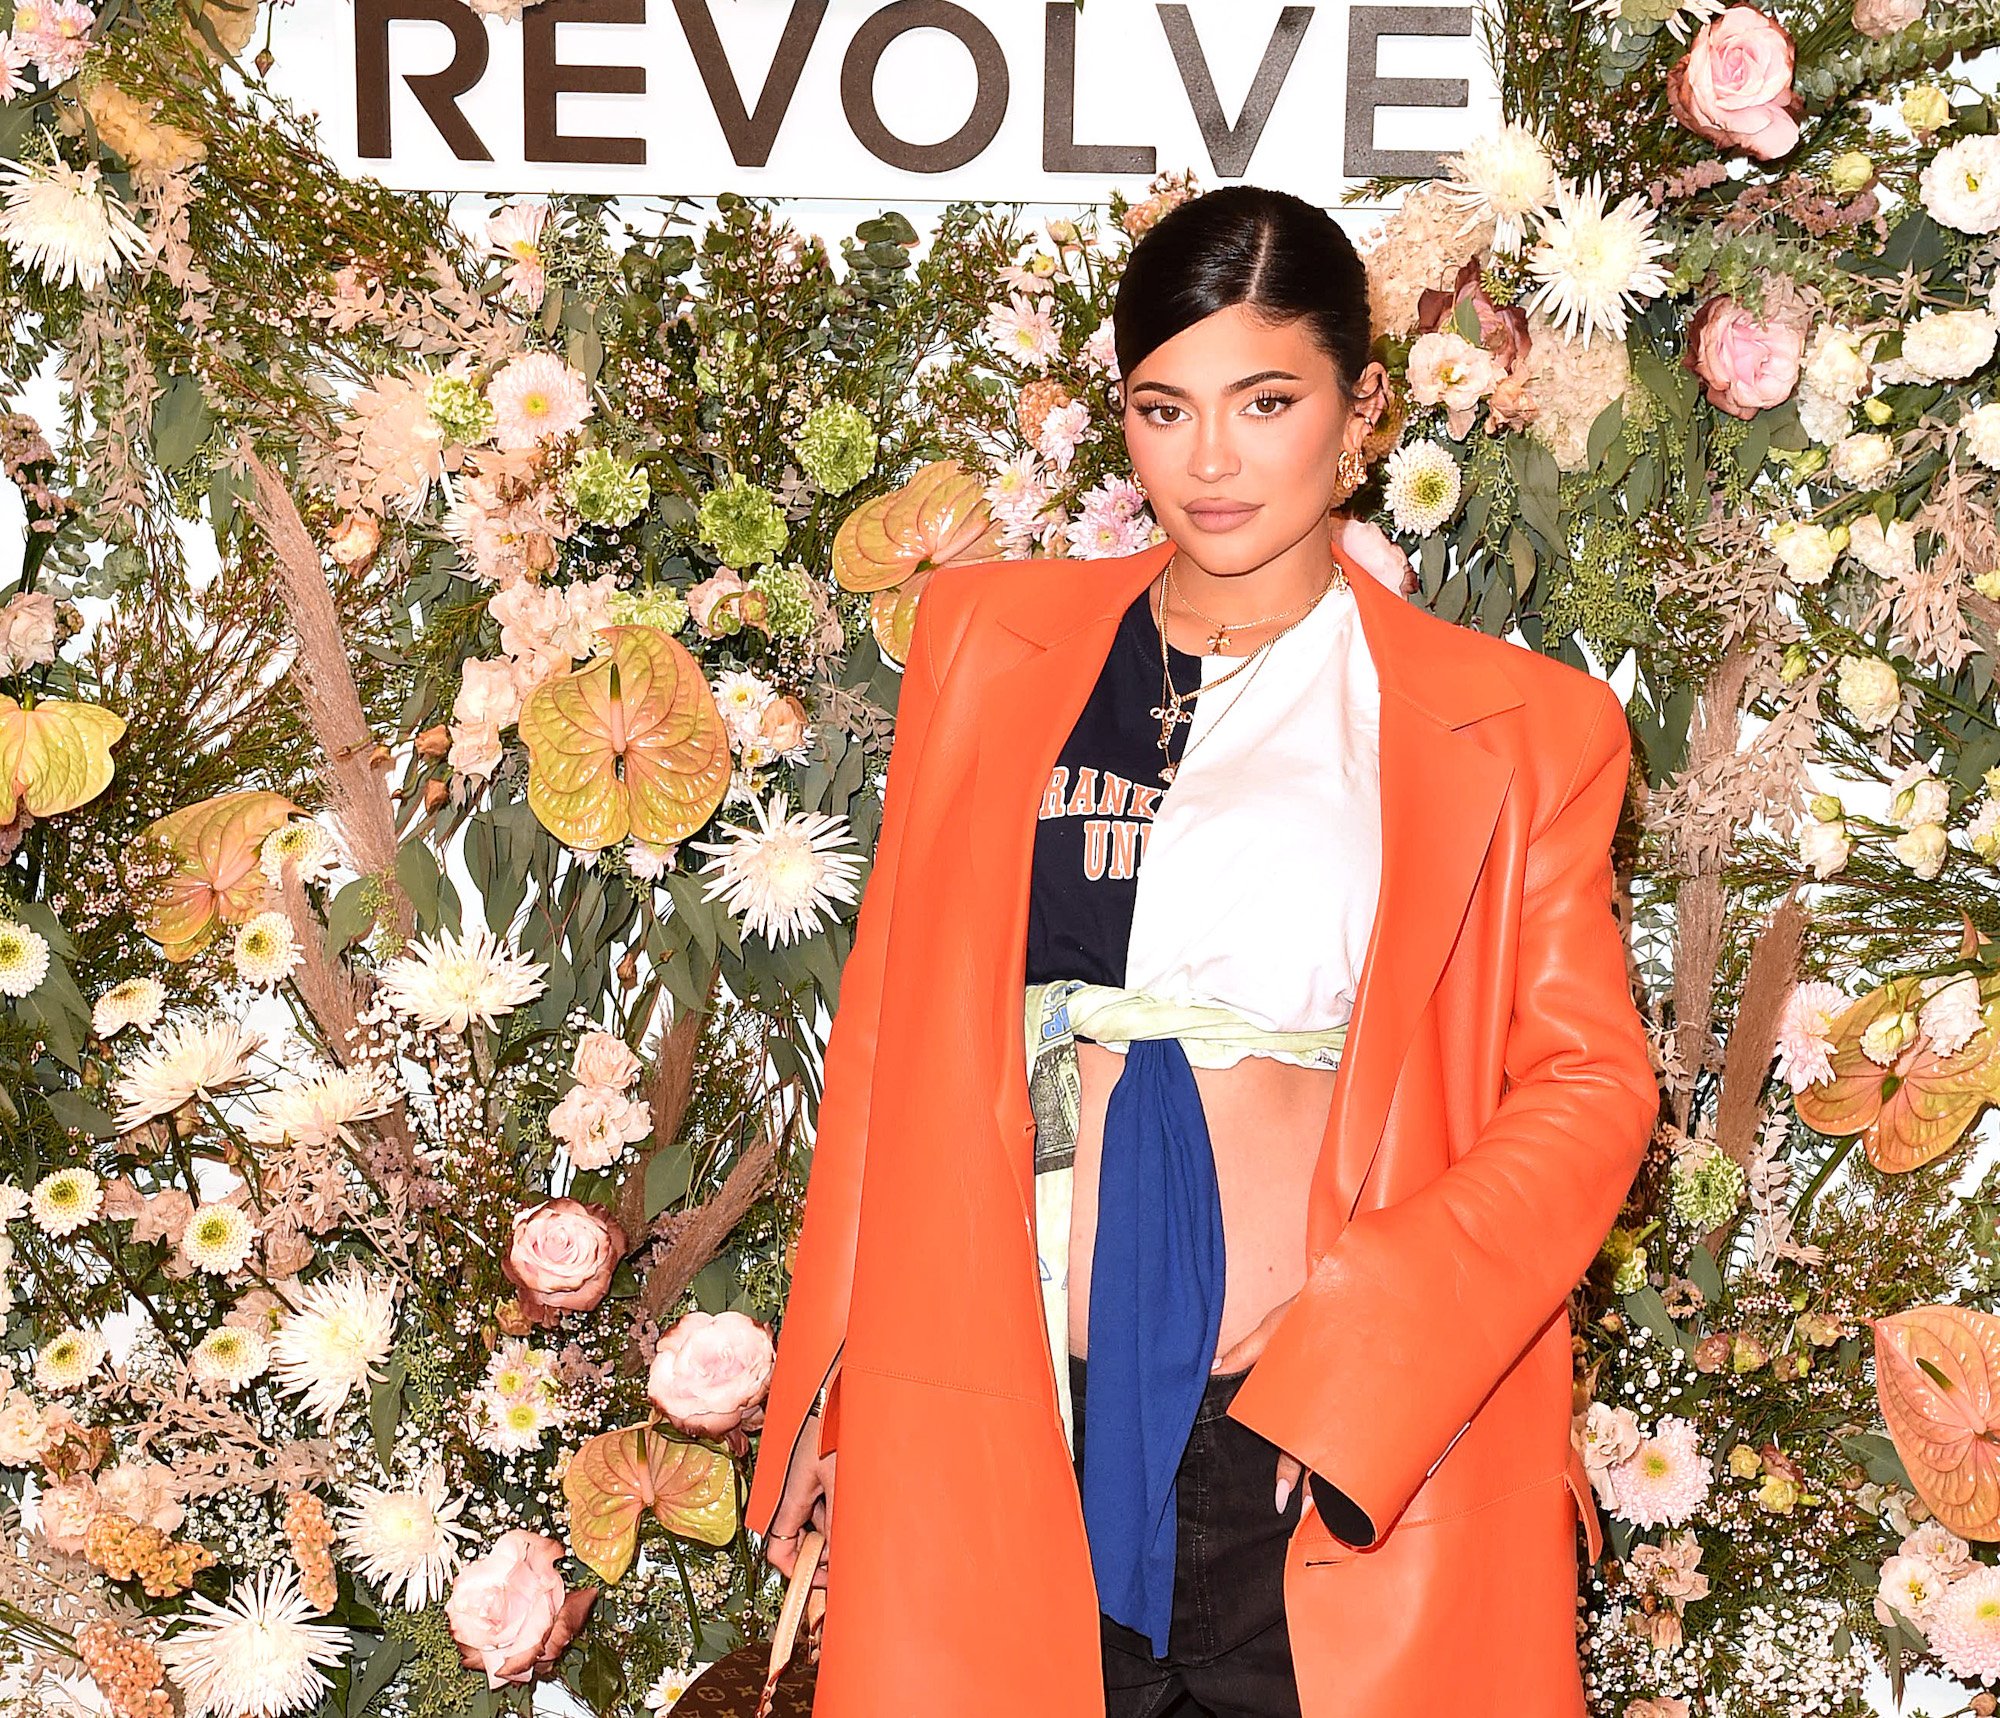 Kylie Jenner attending the REVOLVE Gallery NYFW Presentation And Pop-up Shop At Hudson Yards